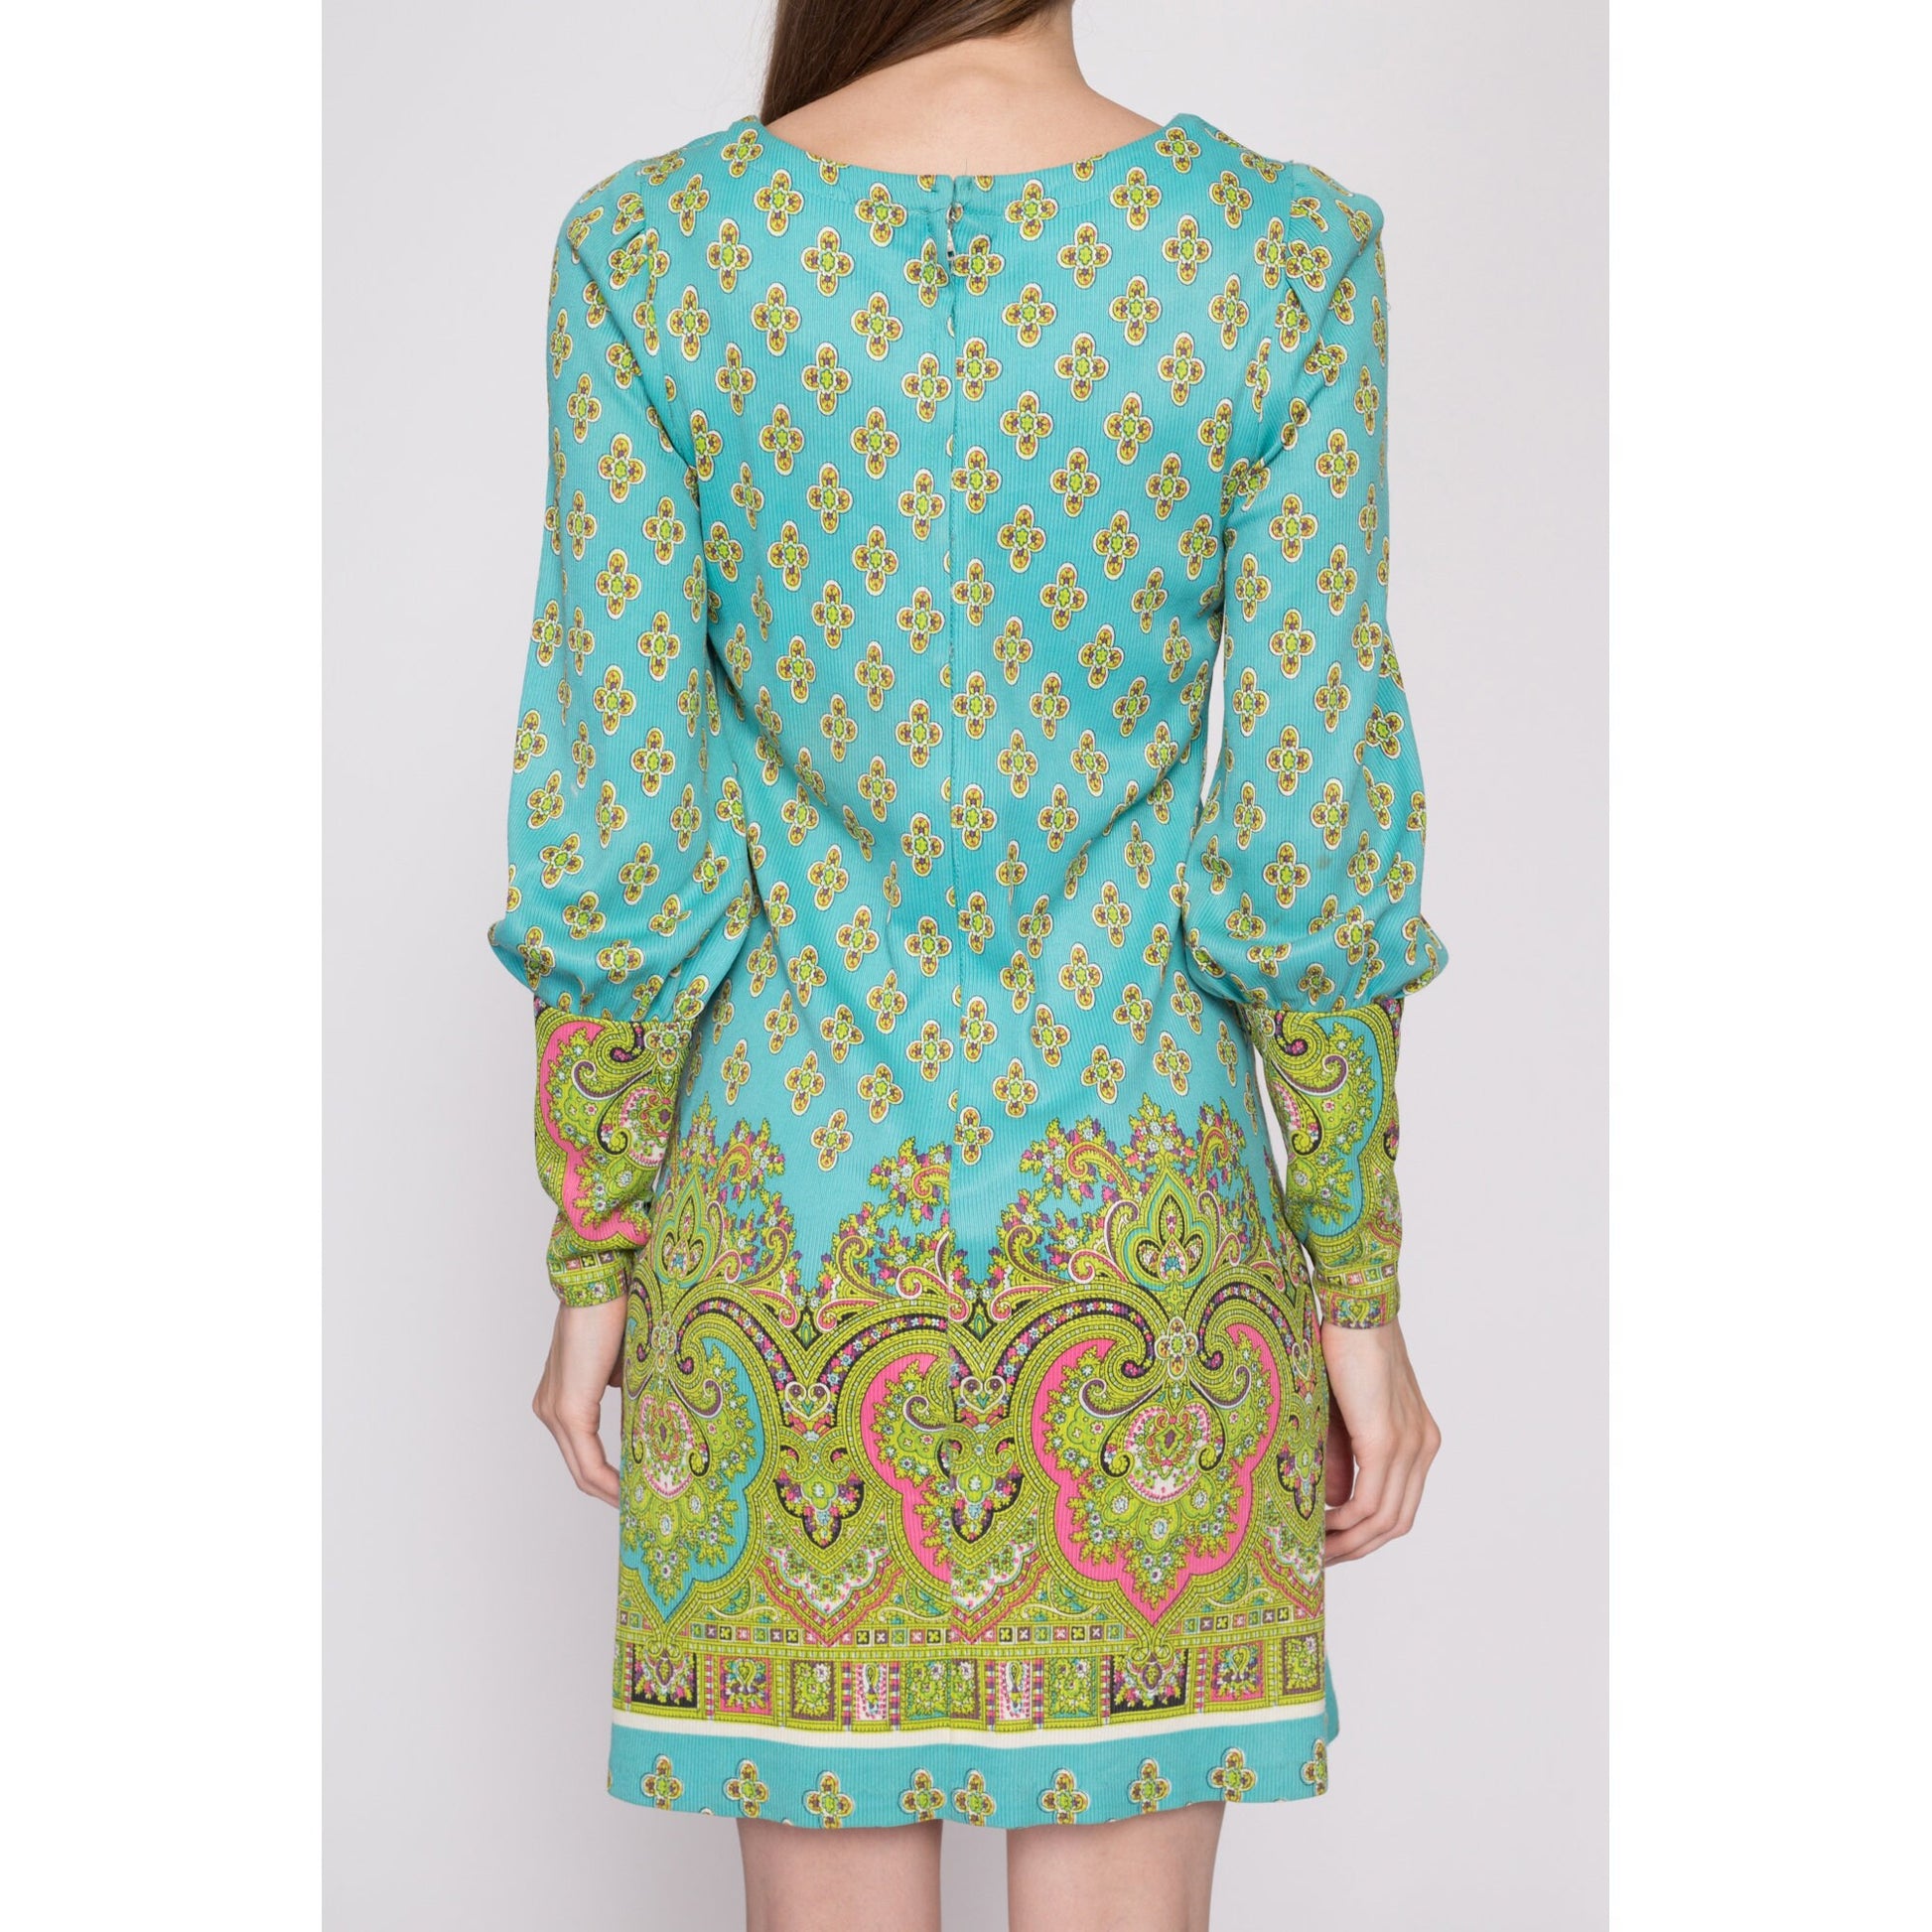 XS-S| 60s Psychedelic Paisley Print Mini Dress - XS to Small | Vintage Blue Green Long Sleeve A Line Shift Mod Minidress